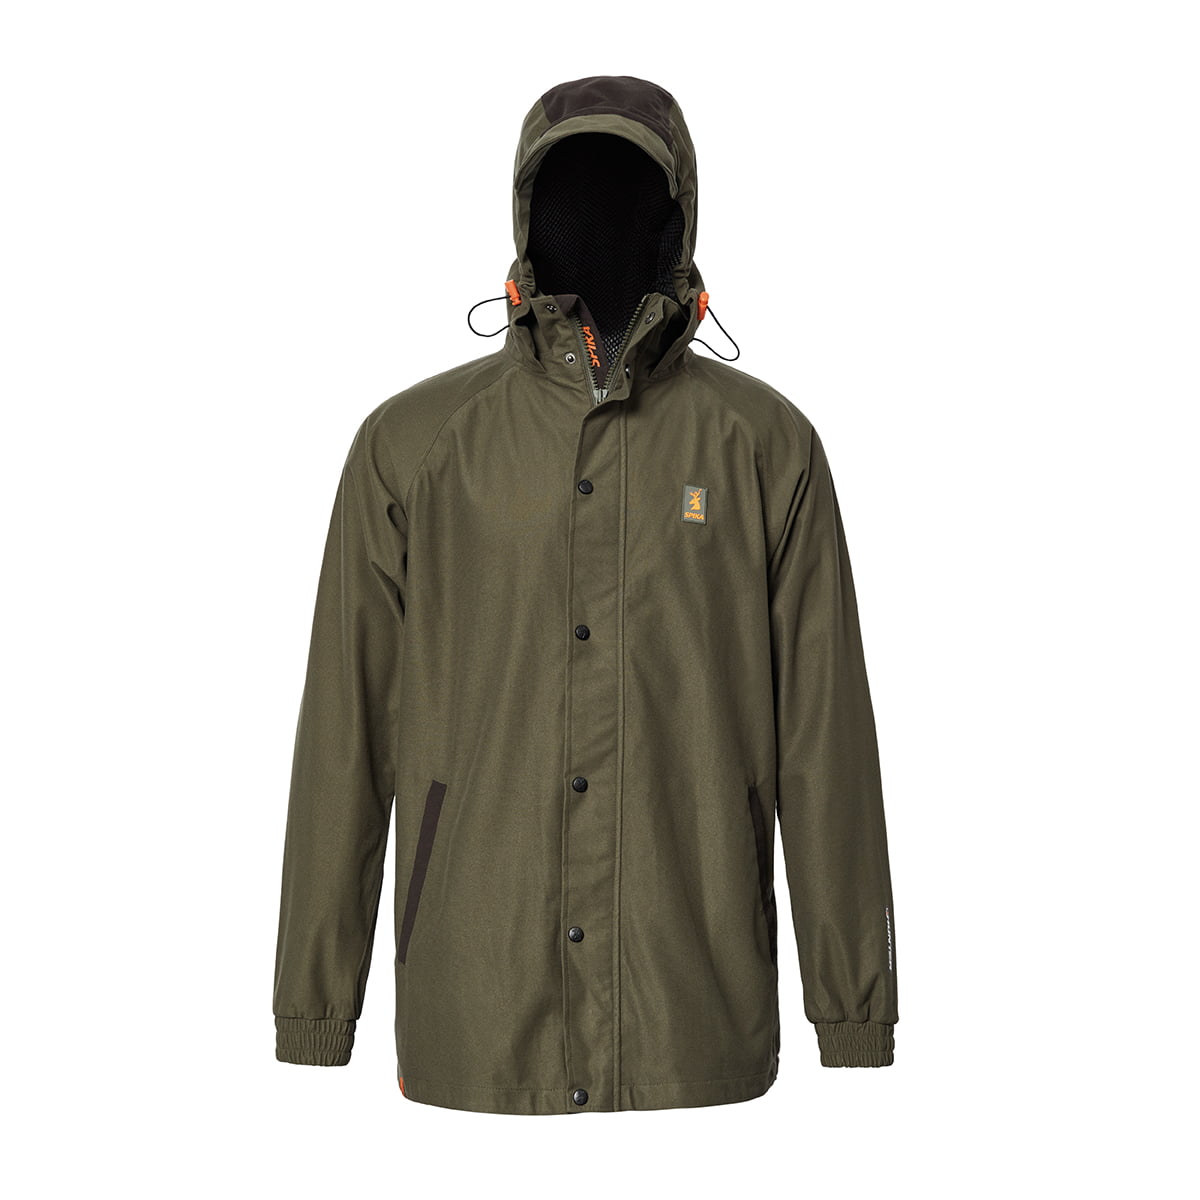 Spiker Edge Waterproof Jacket - Olive - S - Mansfield Hunting & Fishing - Products to prepare for Corona Virus